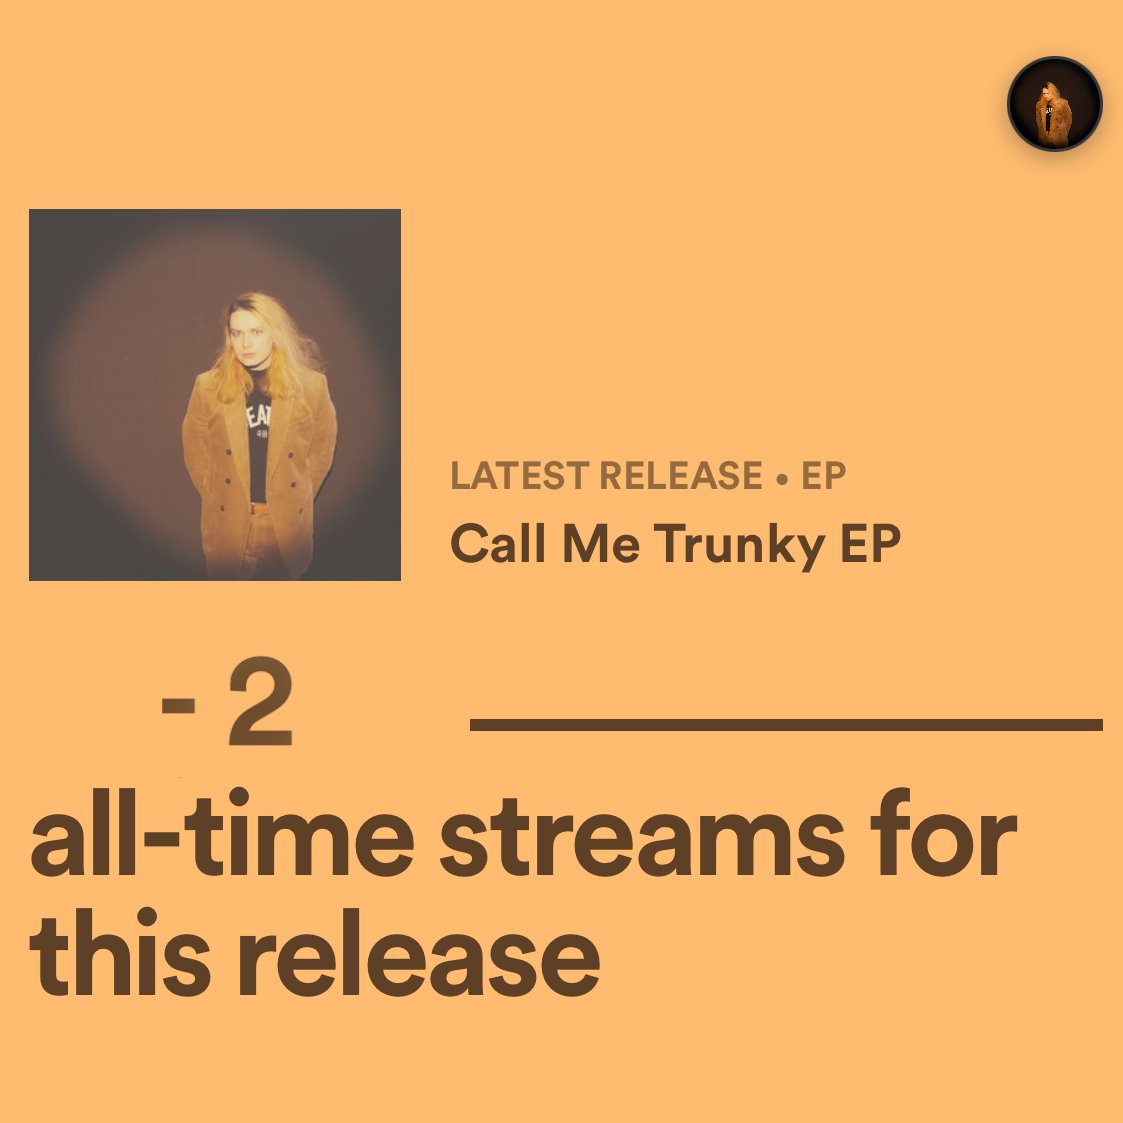 This is a sign, you should listen to my new EP from beginning to end right now. I have what you need, and you can have it for free.